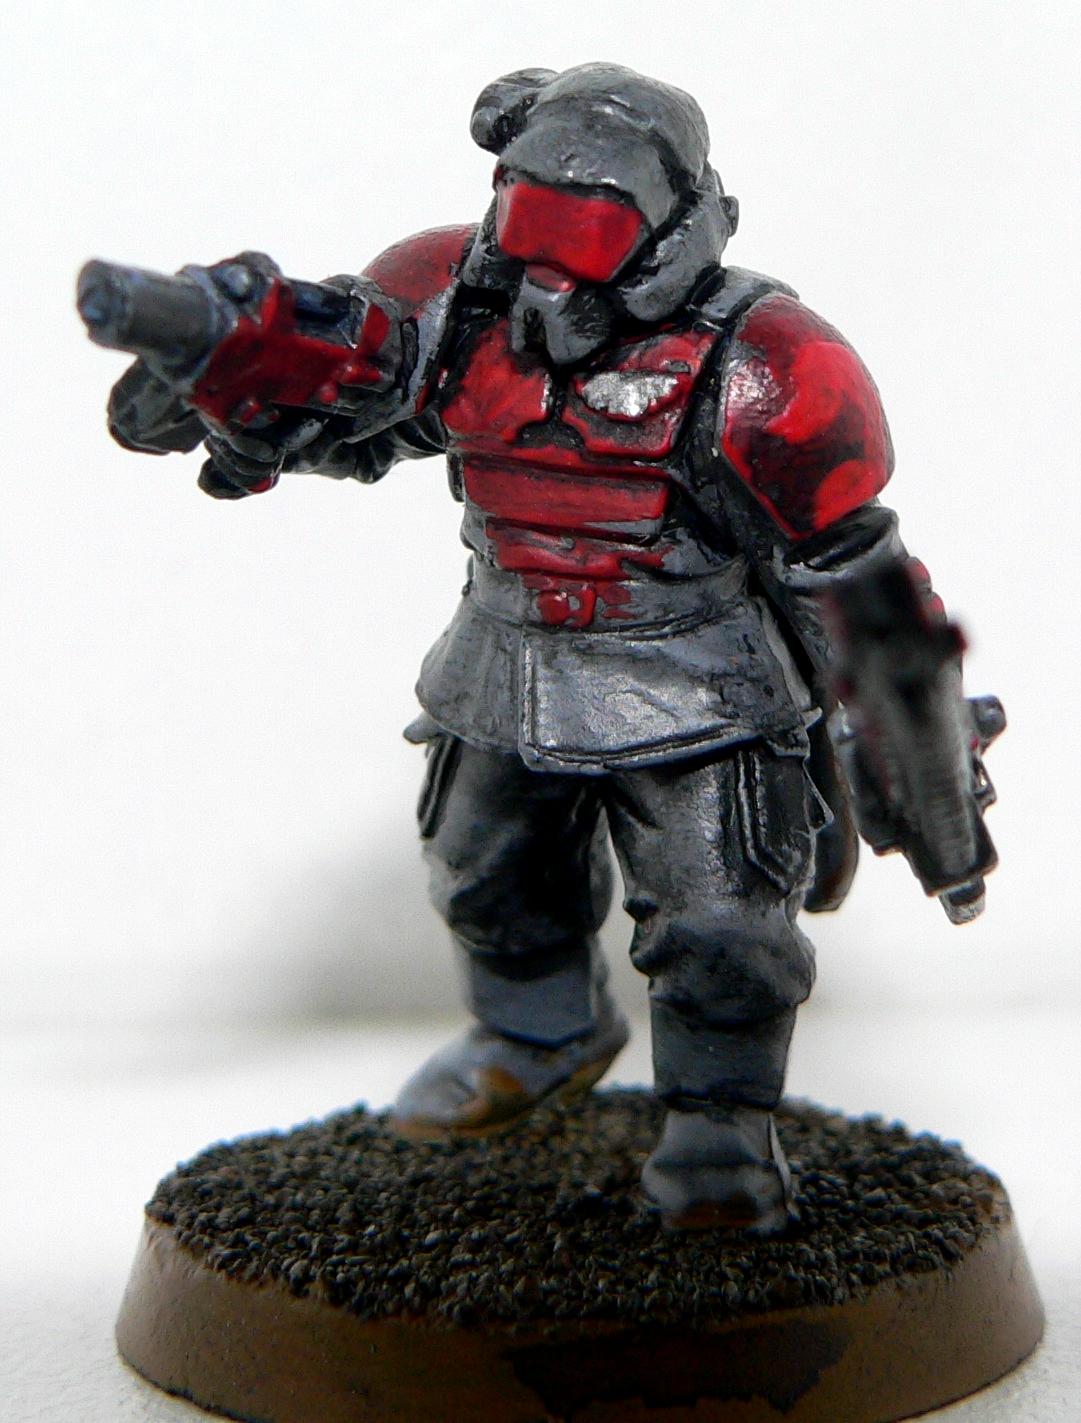 C, Command And Conquer, Imperial Guard, Nod, Warhammer 40,000